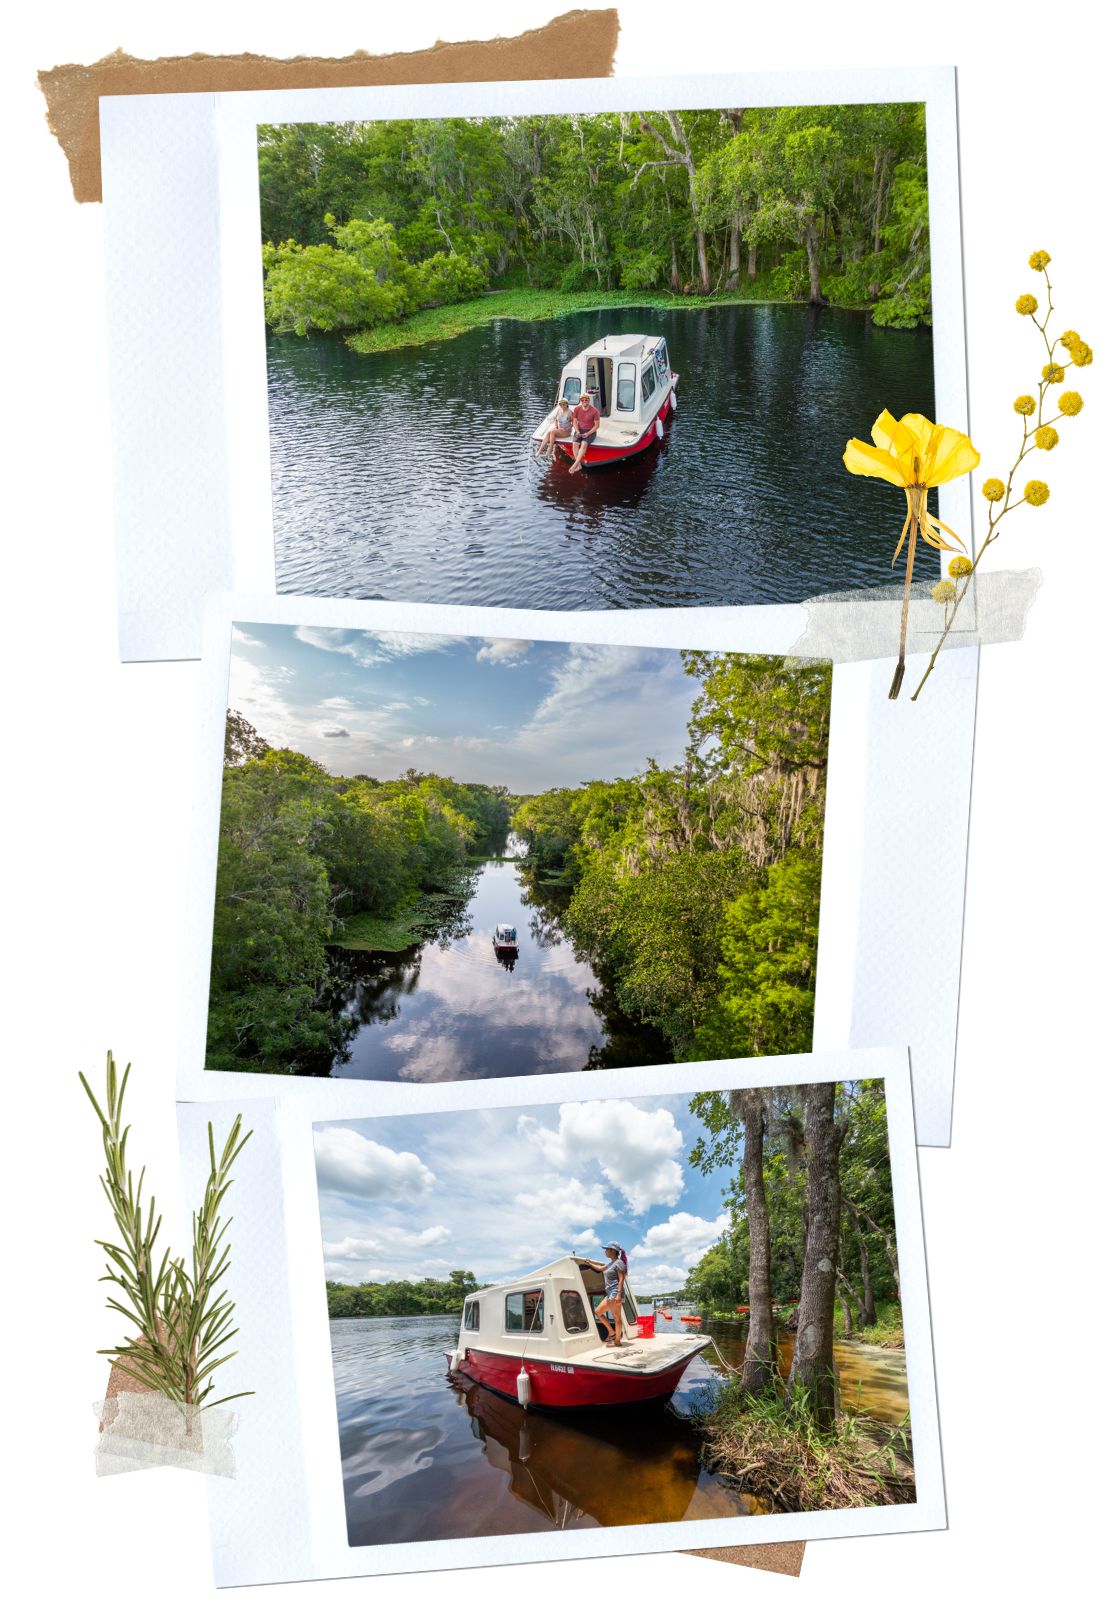 Tiny Houseboat - 7 Unique Things to Do Near Orlando That Aren't Theme Parks